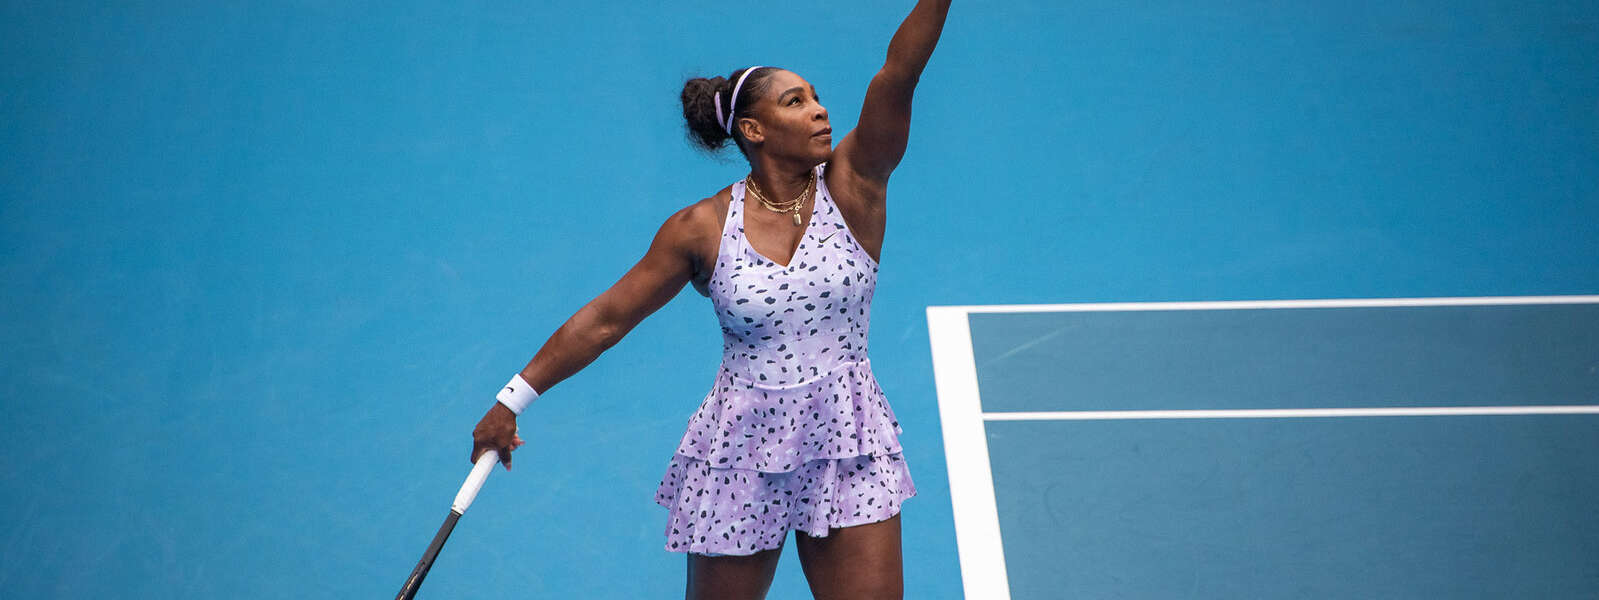 Serena Williams wearing a purple outfit serves on a blue tennis court.